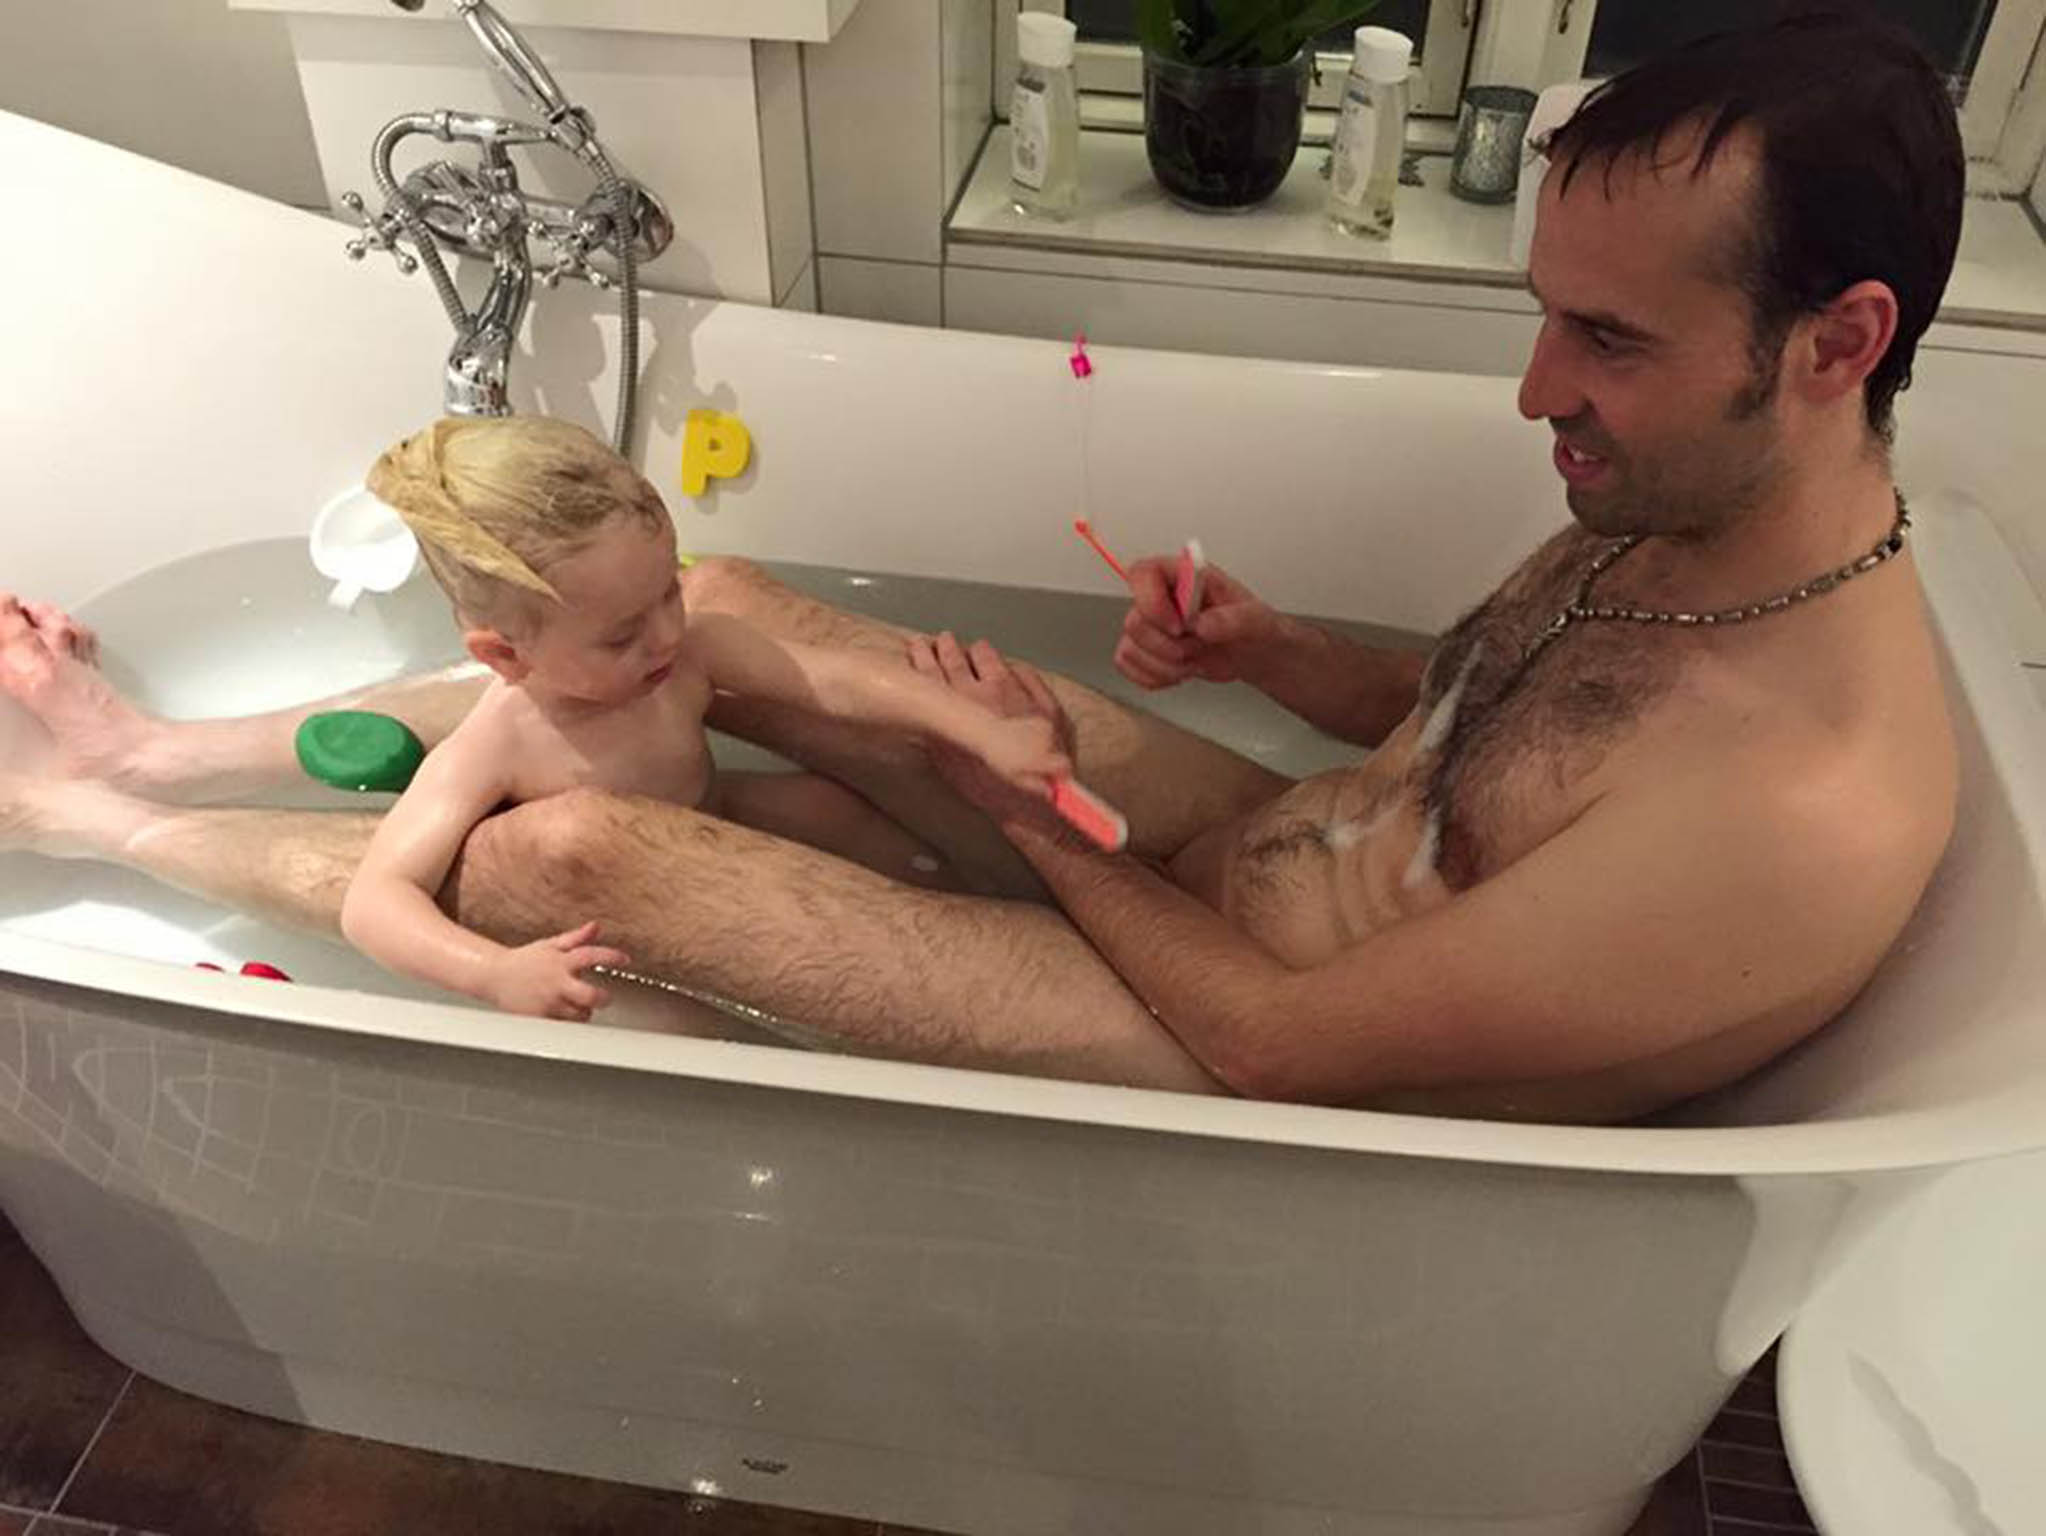 Torben Chris Danish comedian posts photo of himself taking a bath with his two-year-old daughter in face of paedophilia claims The Independent The Independent photo